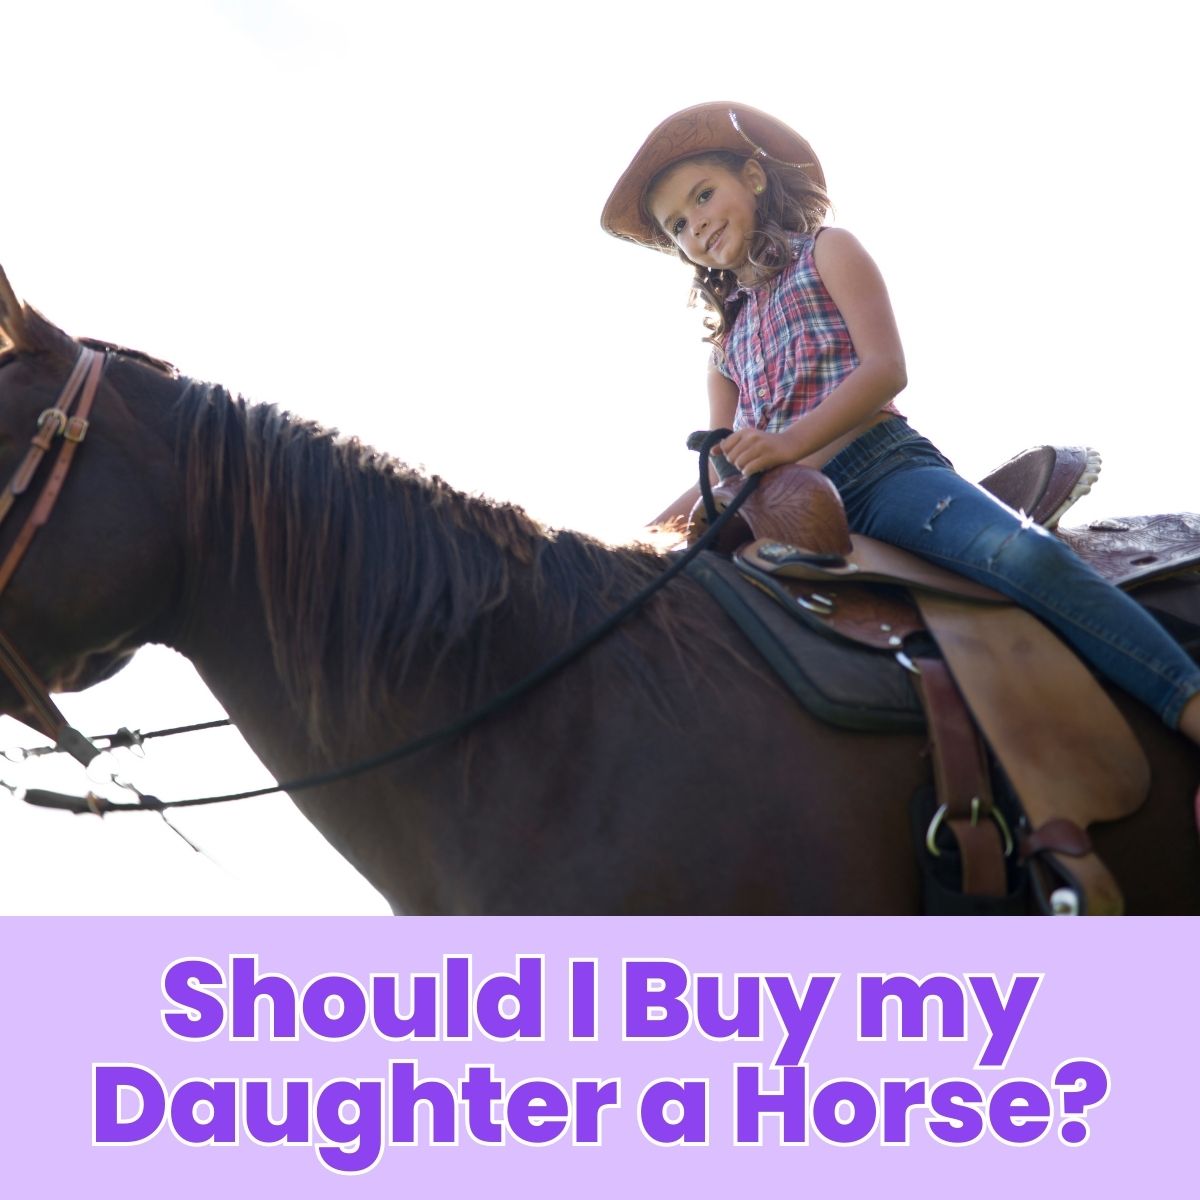 You are currently viewing Should I Buy my Daughter a Horse?